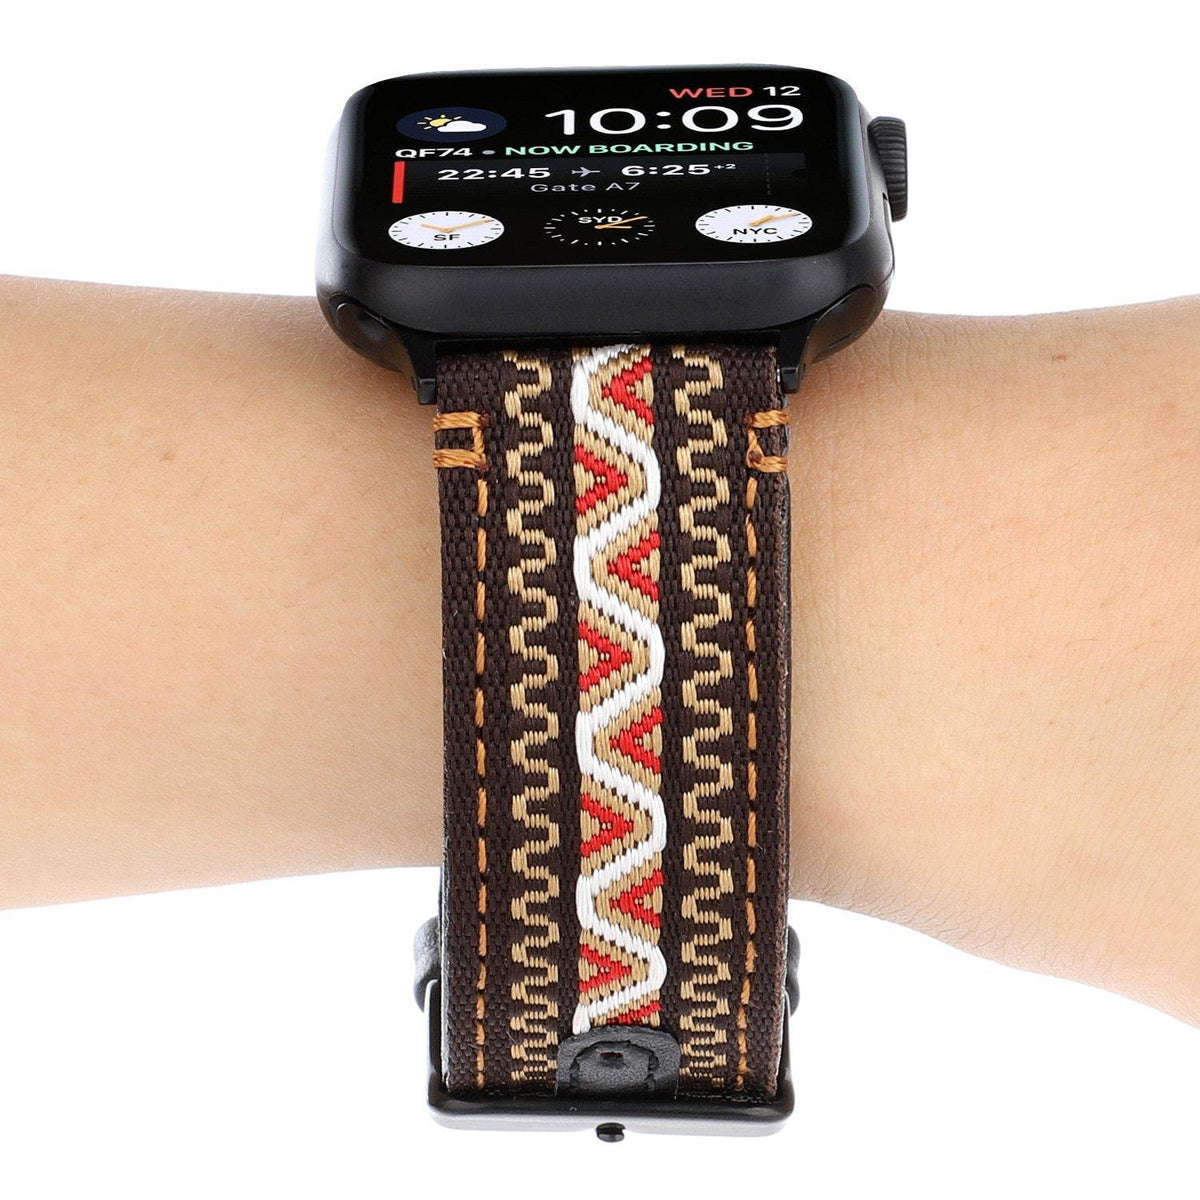 Leather Motif Apple Watch BandItem Type: WatchbandsBand Material Type: LeatherCondition: New without tagsClasp Type: metal buckle


[focus_keyword]Apple Watch Band